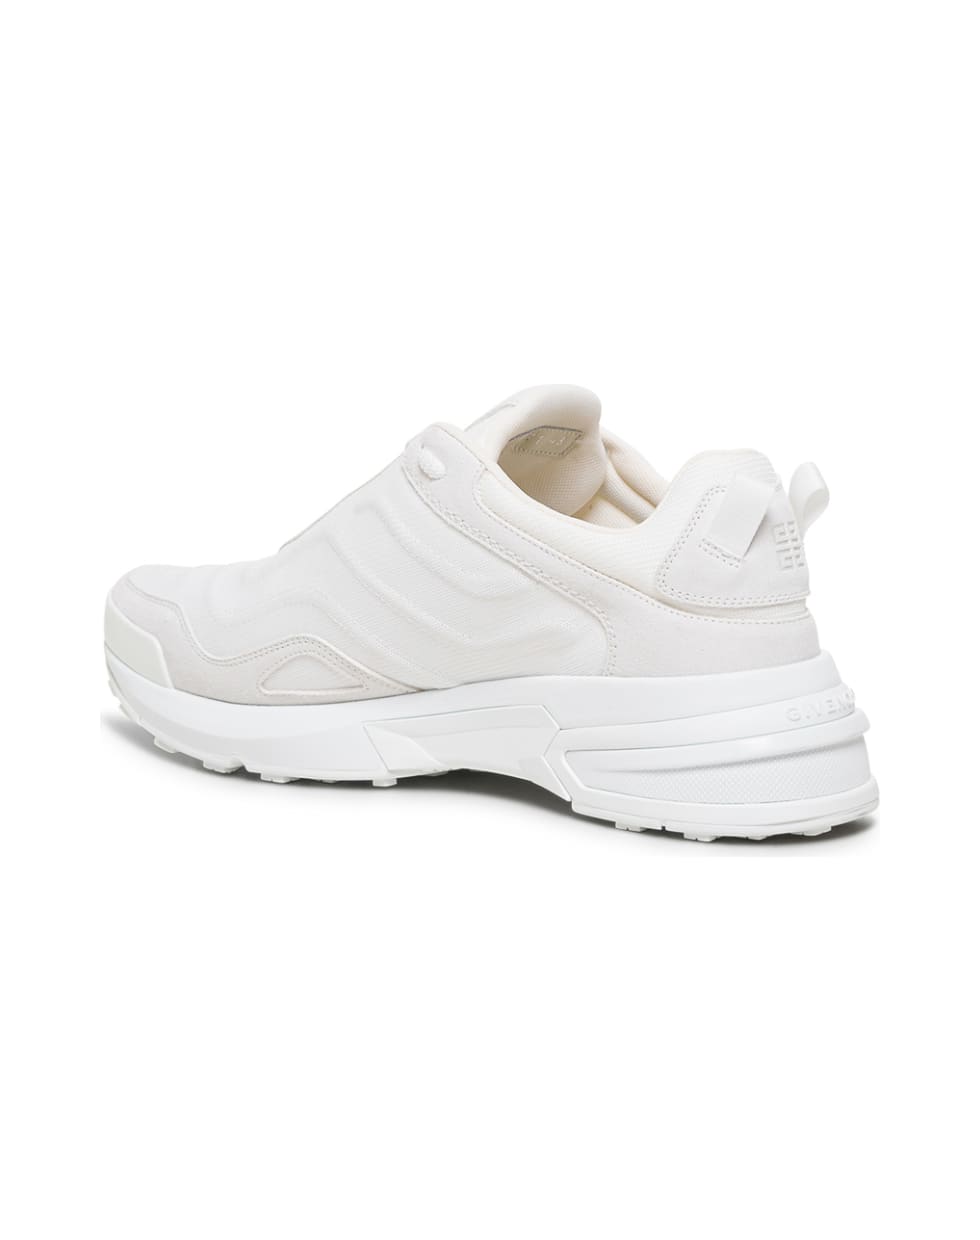 Givenchy Giv 1 Light Sneakers In Canvas And Leather - White